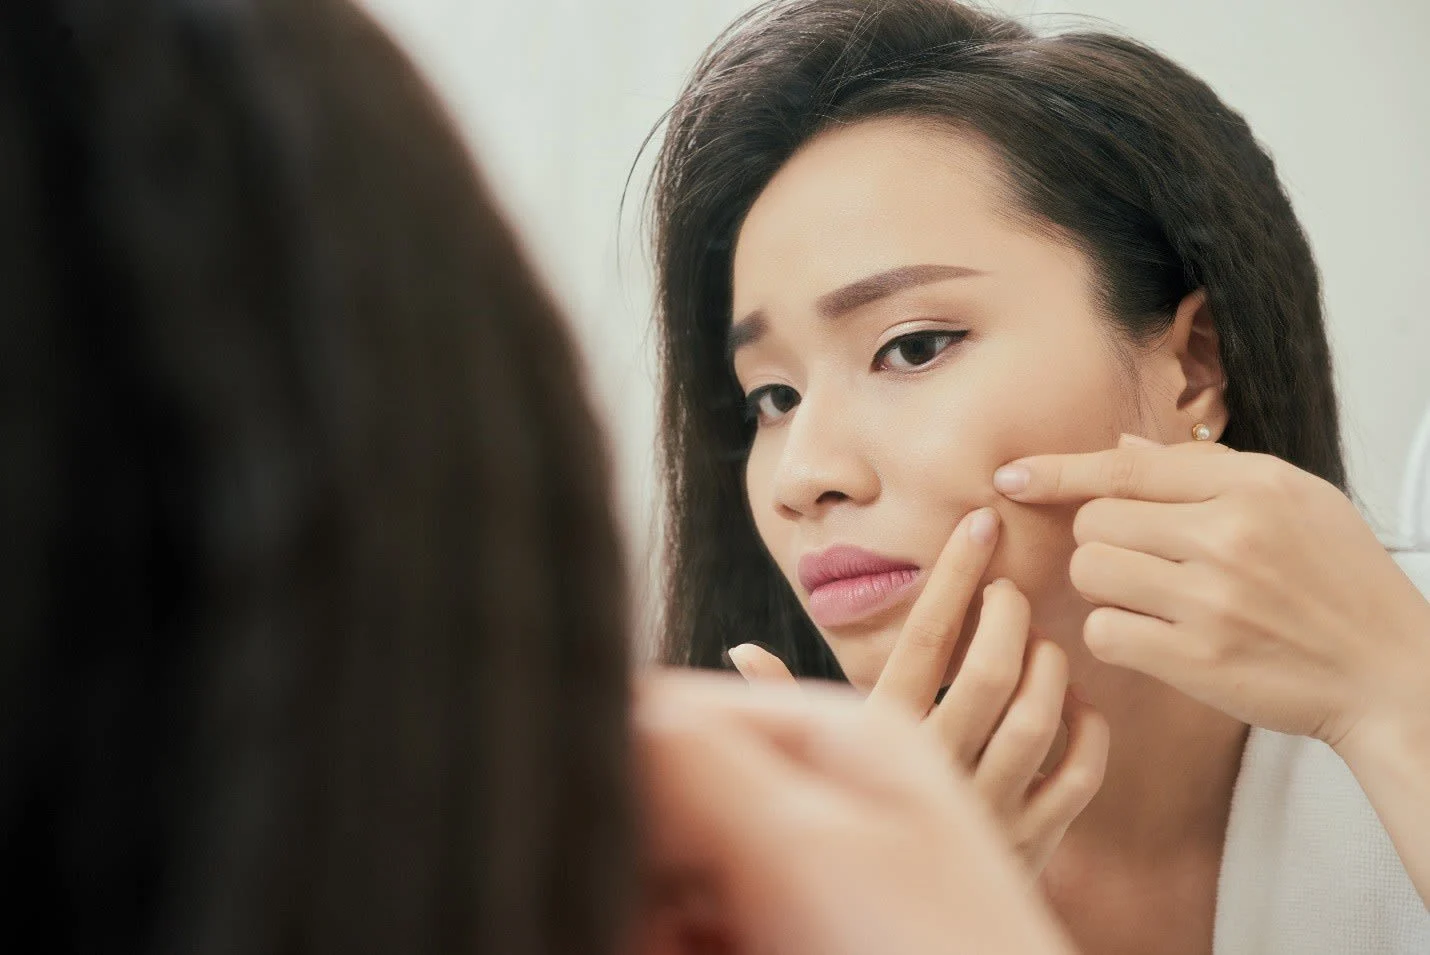 7 Surprising Reasons Why You Have Pimples and Acne